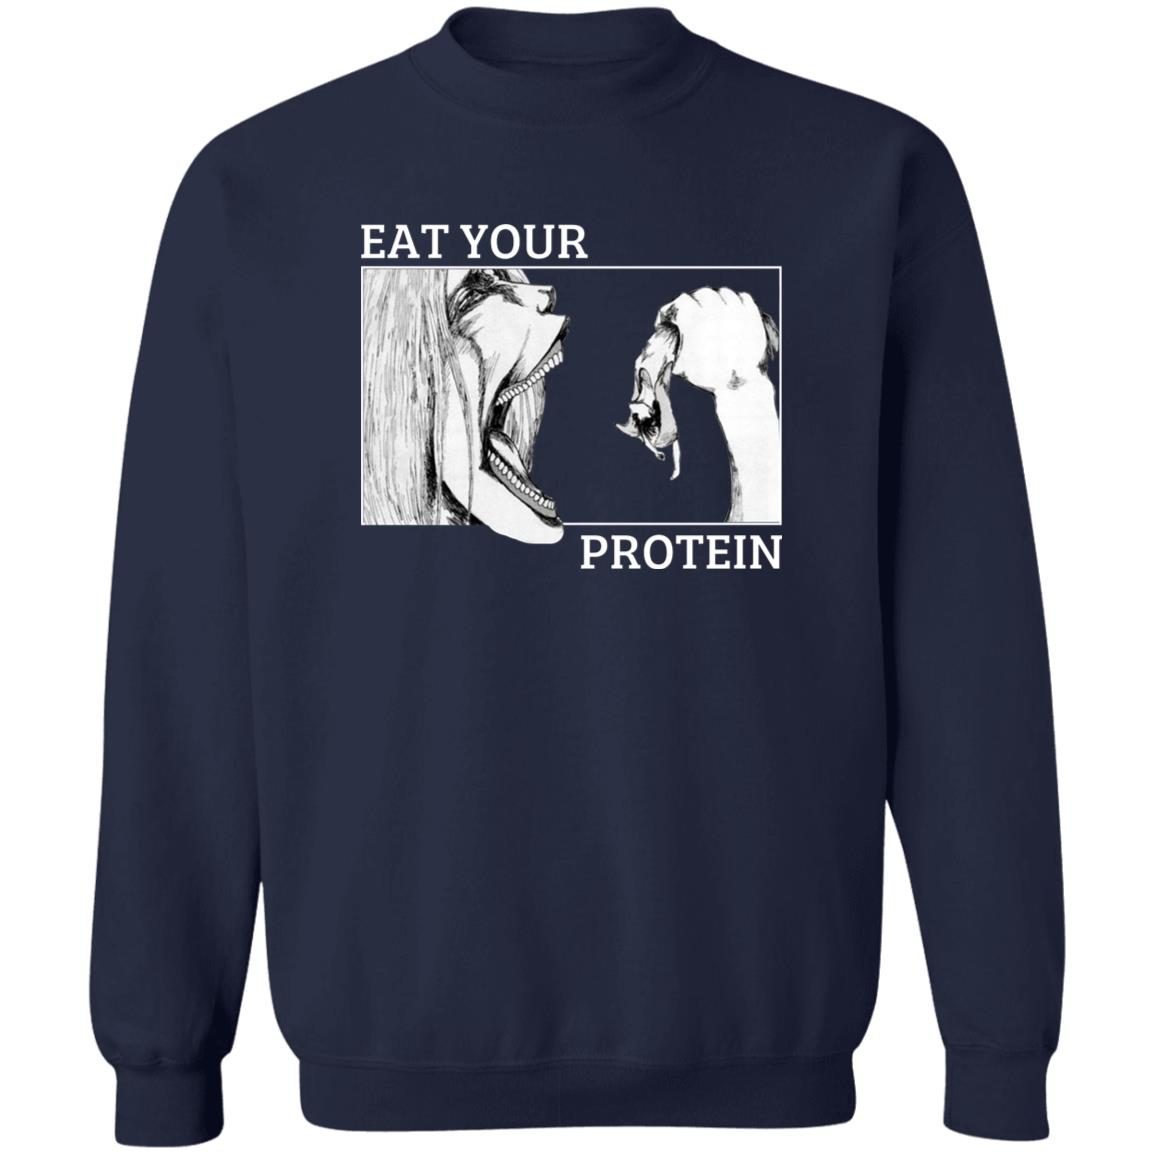 Eat Your Protein Attack On Titan shirt